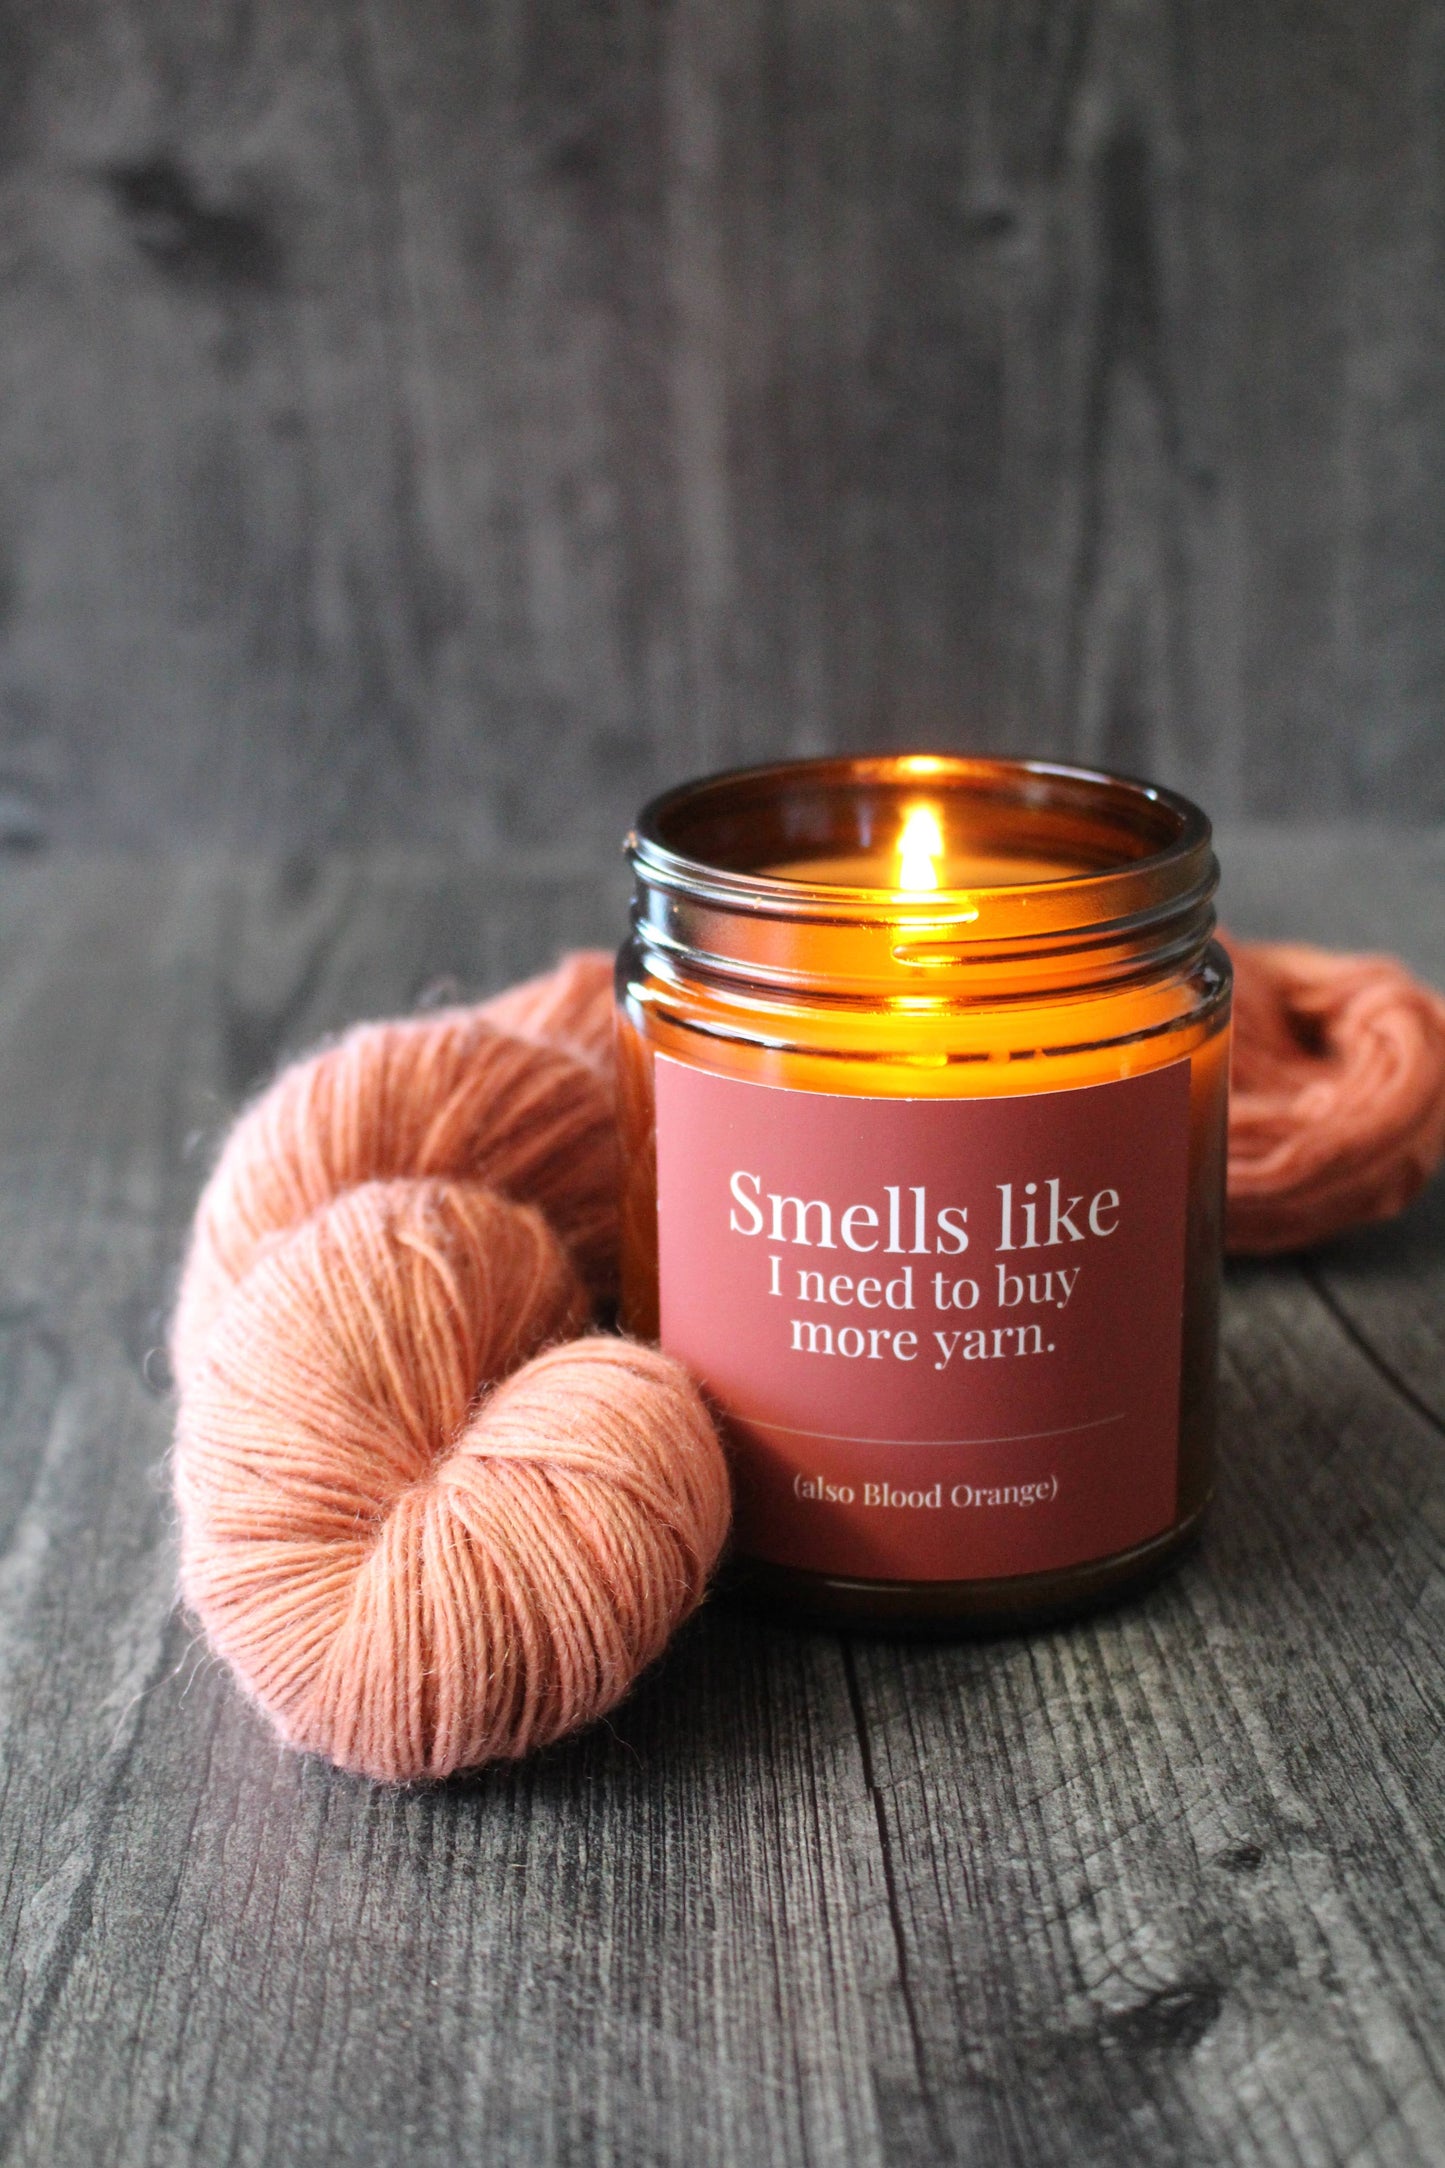 NNK Press 9 Oz Blood Orange | Smells like I need to buy more yarn. Hand-poured Coconut Soy Wax Candles For Knitters Candle